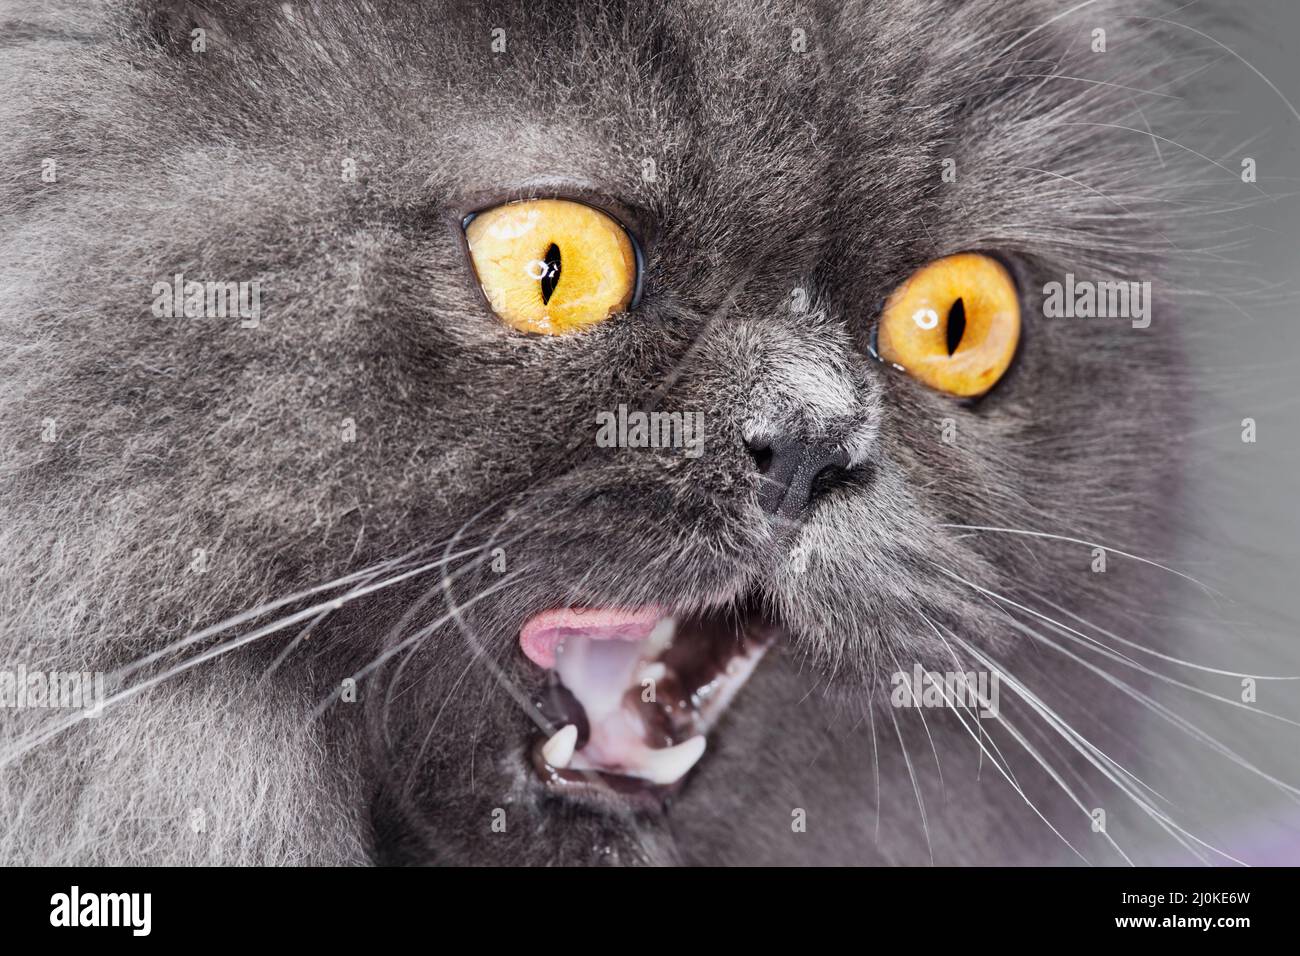 Super close up macro of a long haired grey cat licking his lips. Stock Photo